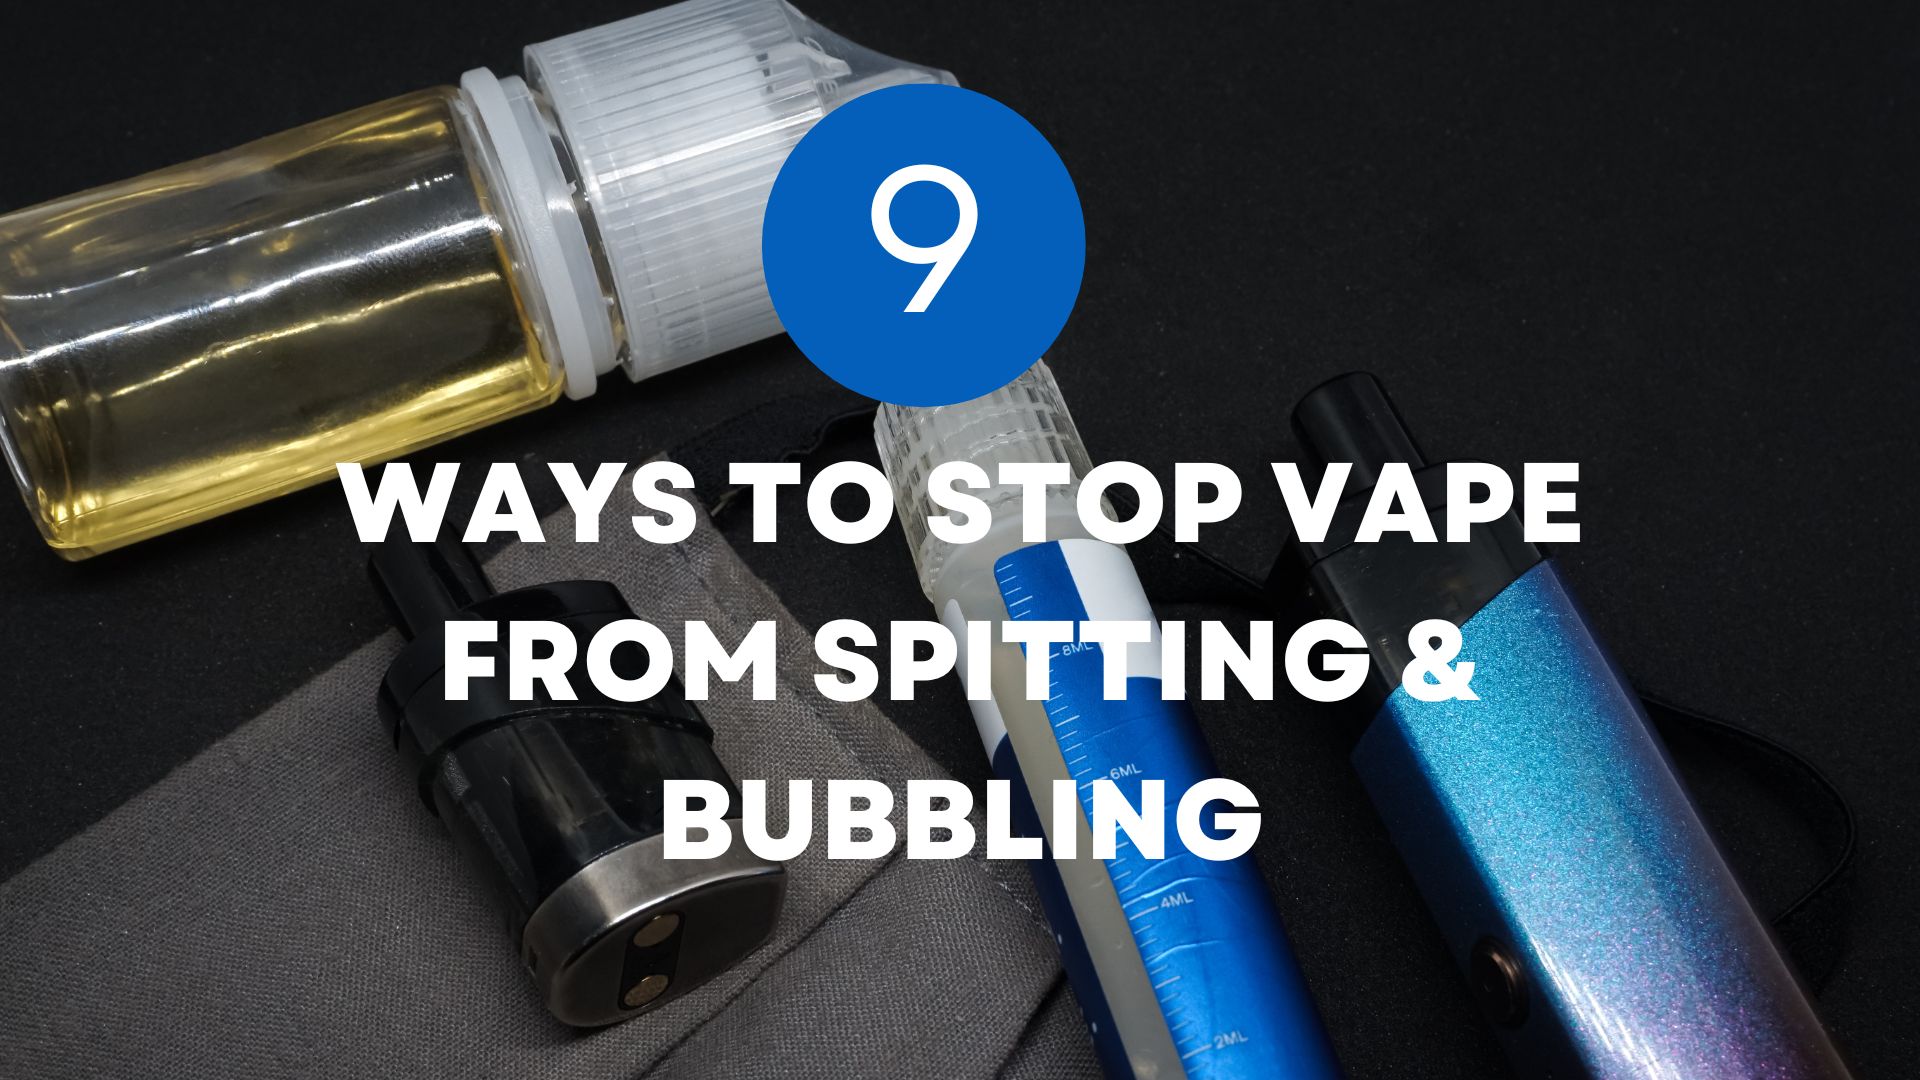 Stop Vape from Spitting & Bubbling